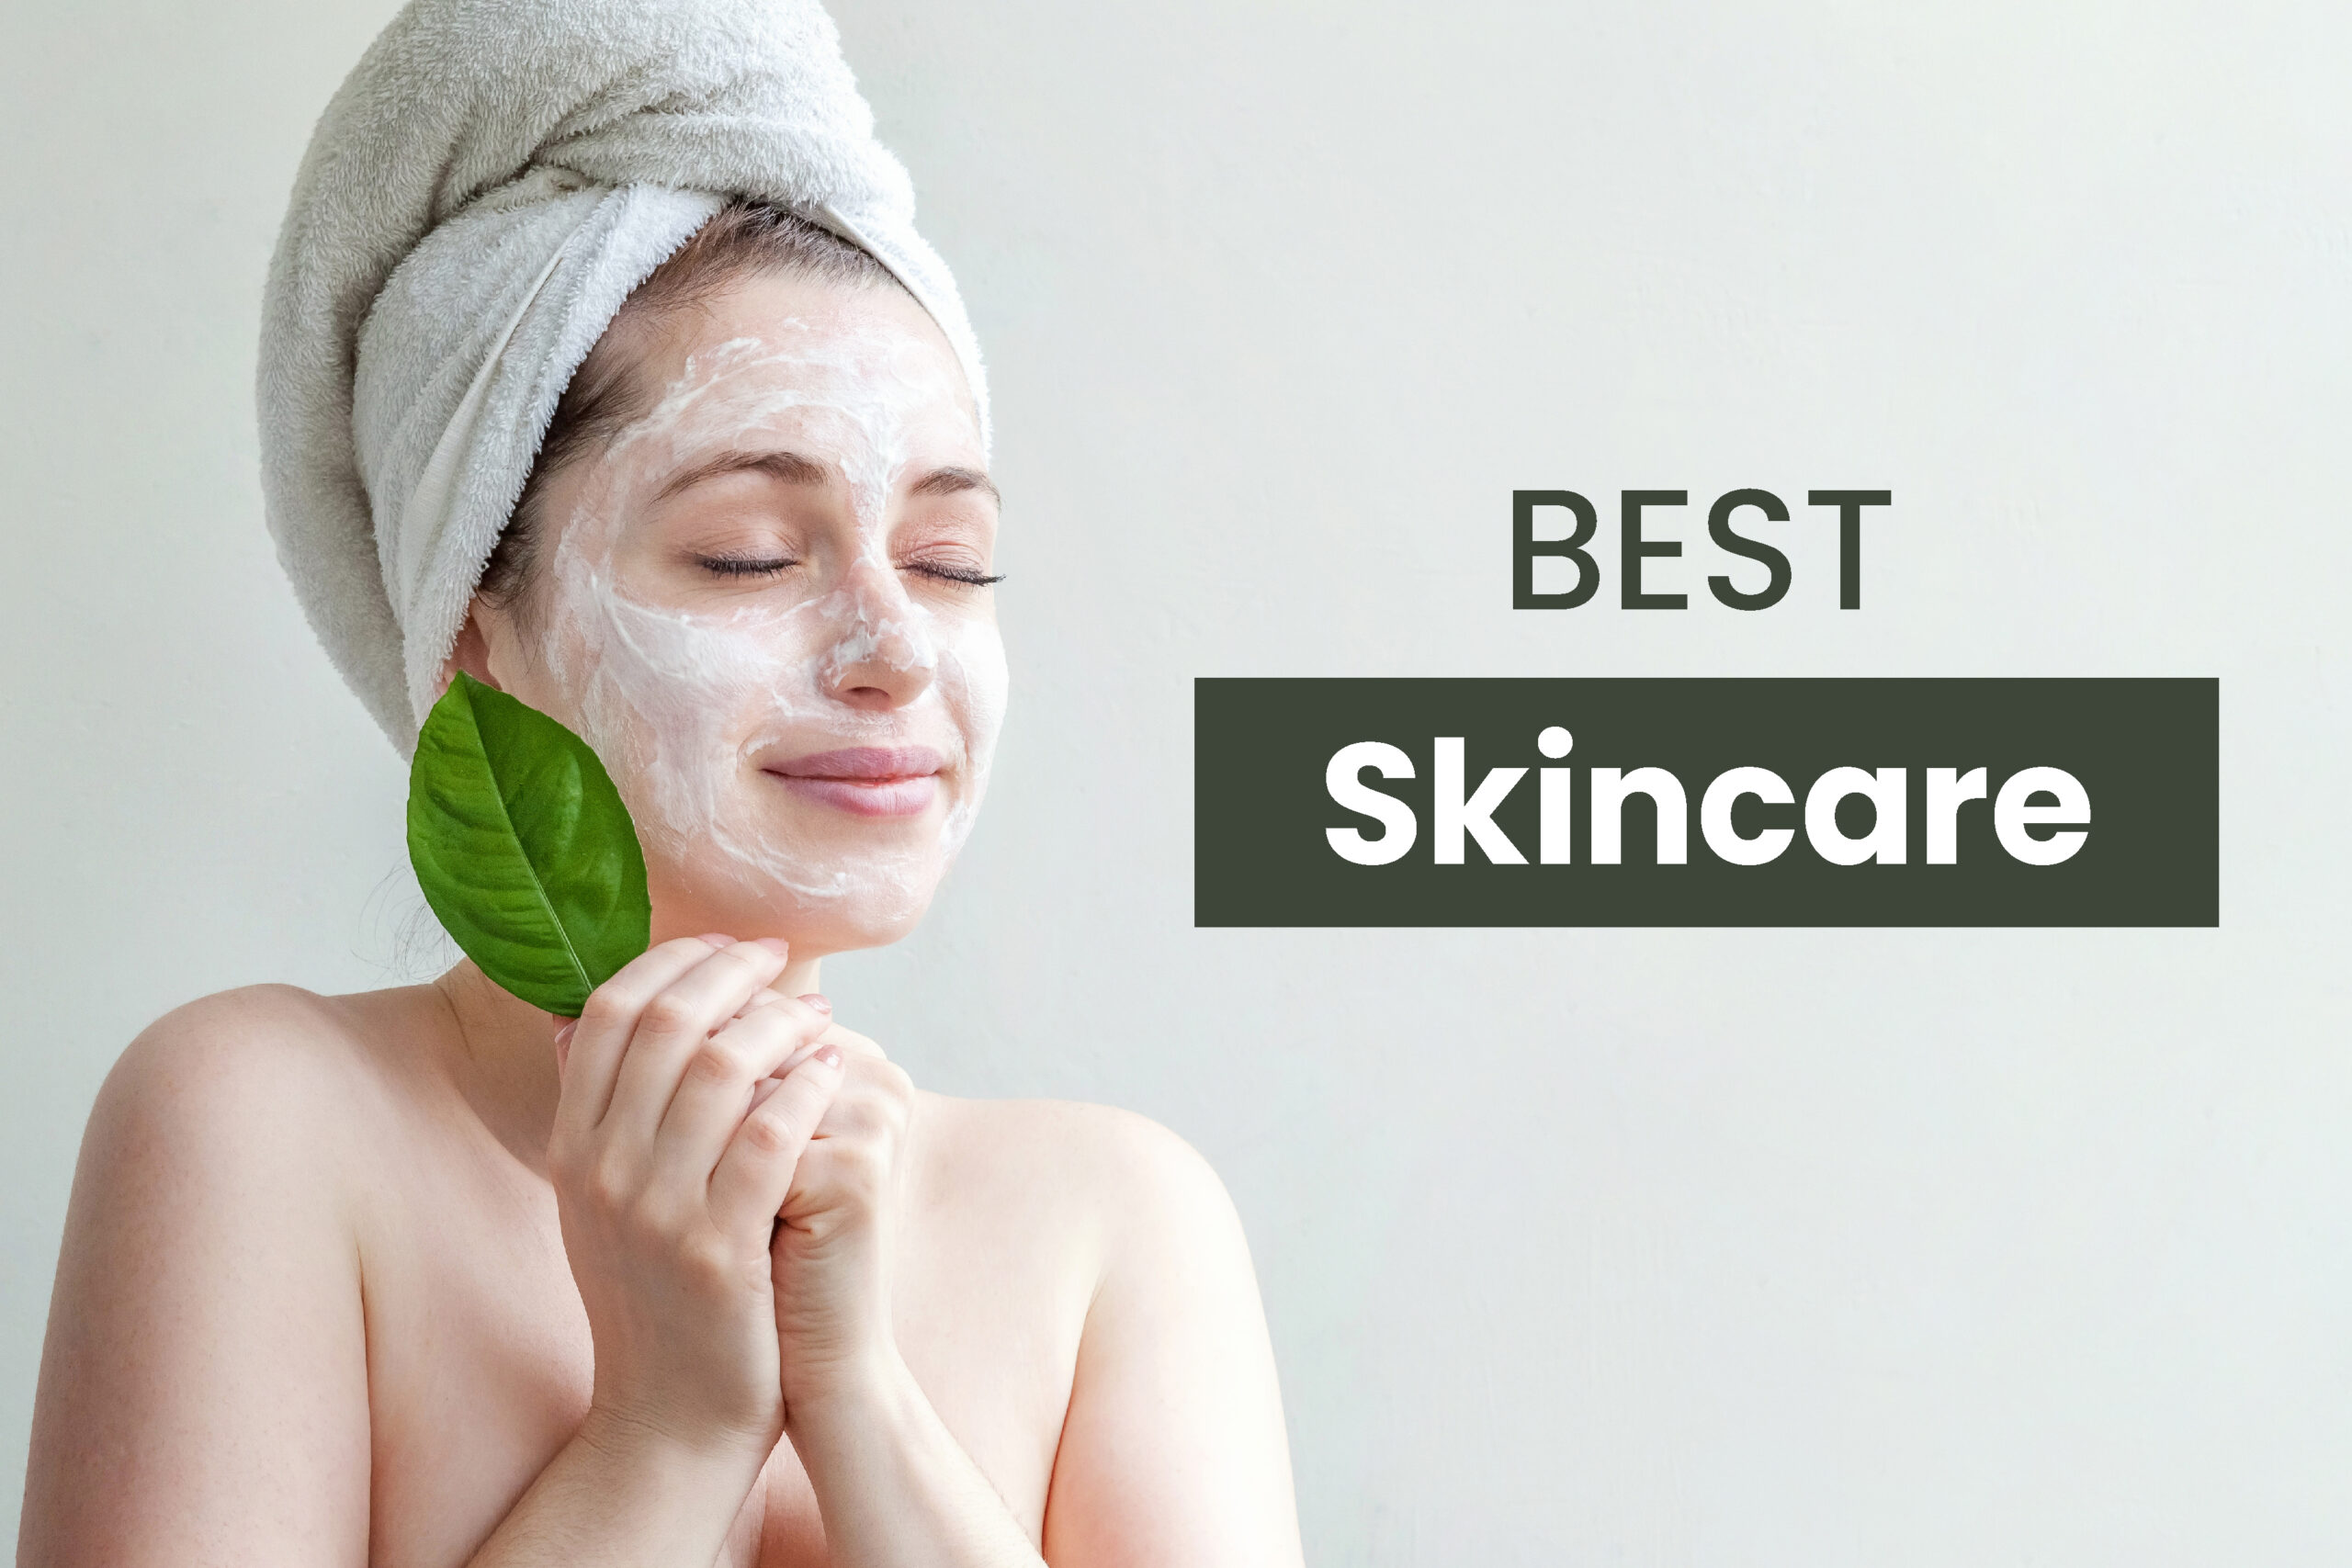 Best Skin Care Products